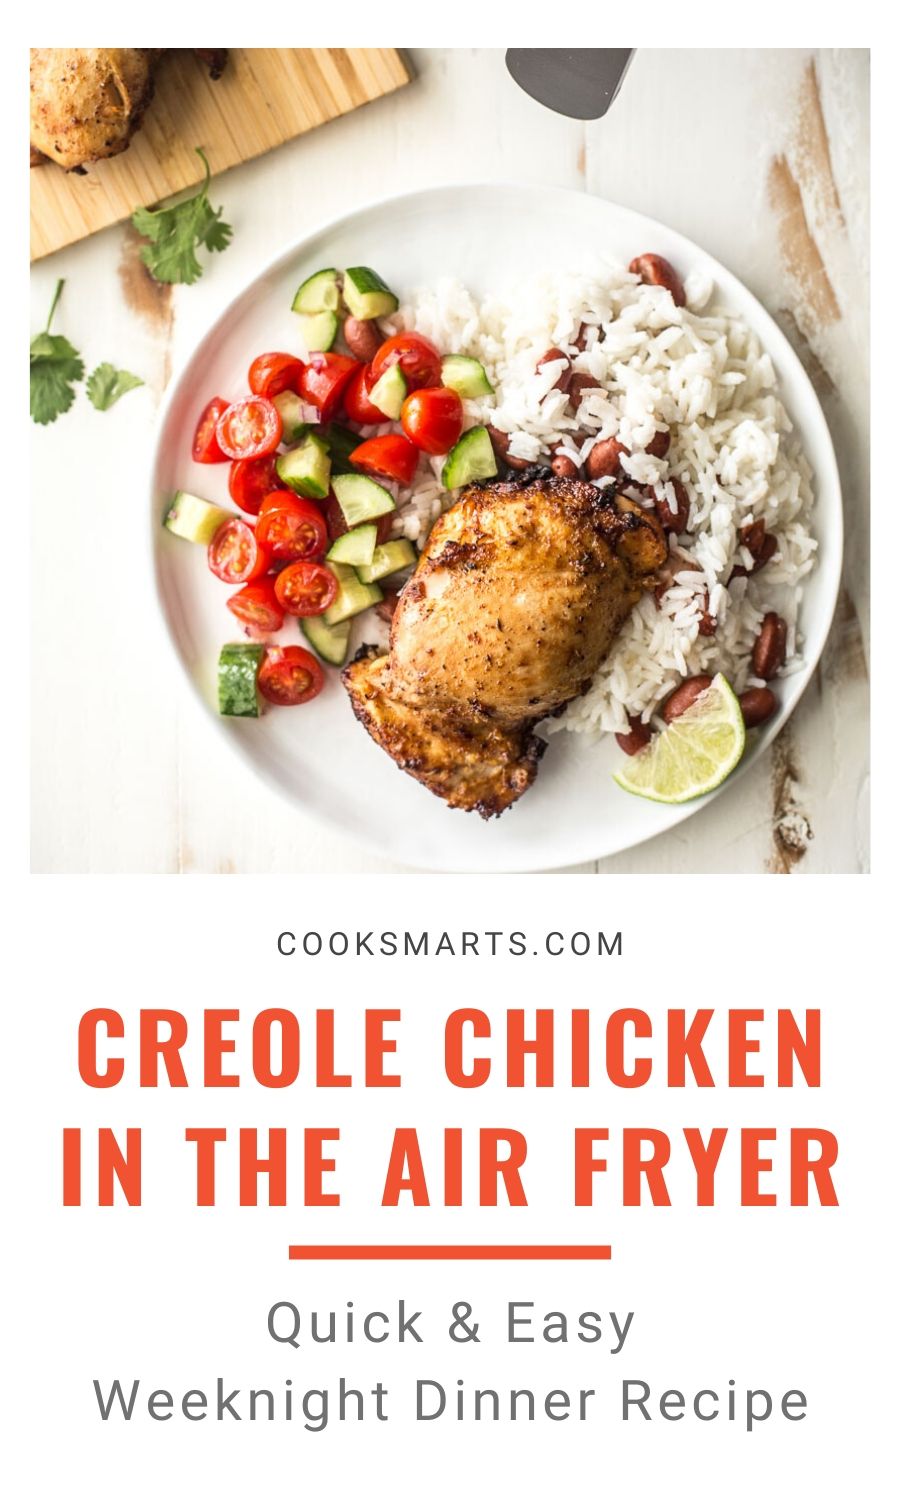 How to Make Jerk Chicken in an Air Fryer | Cook Smarts